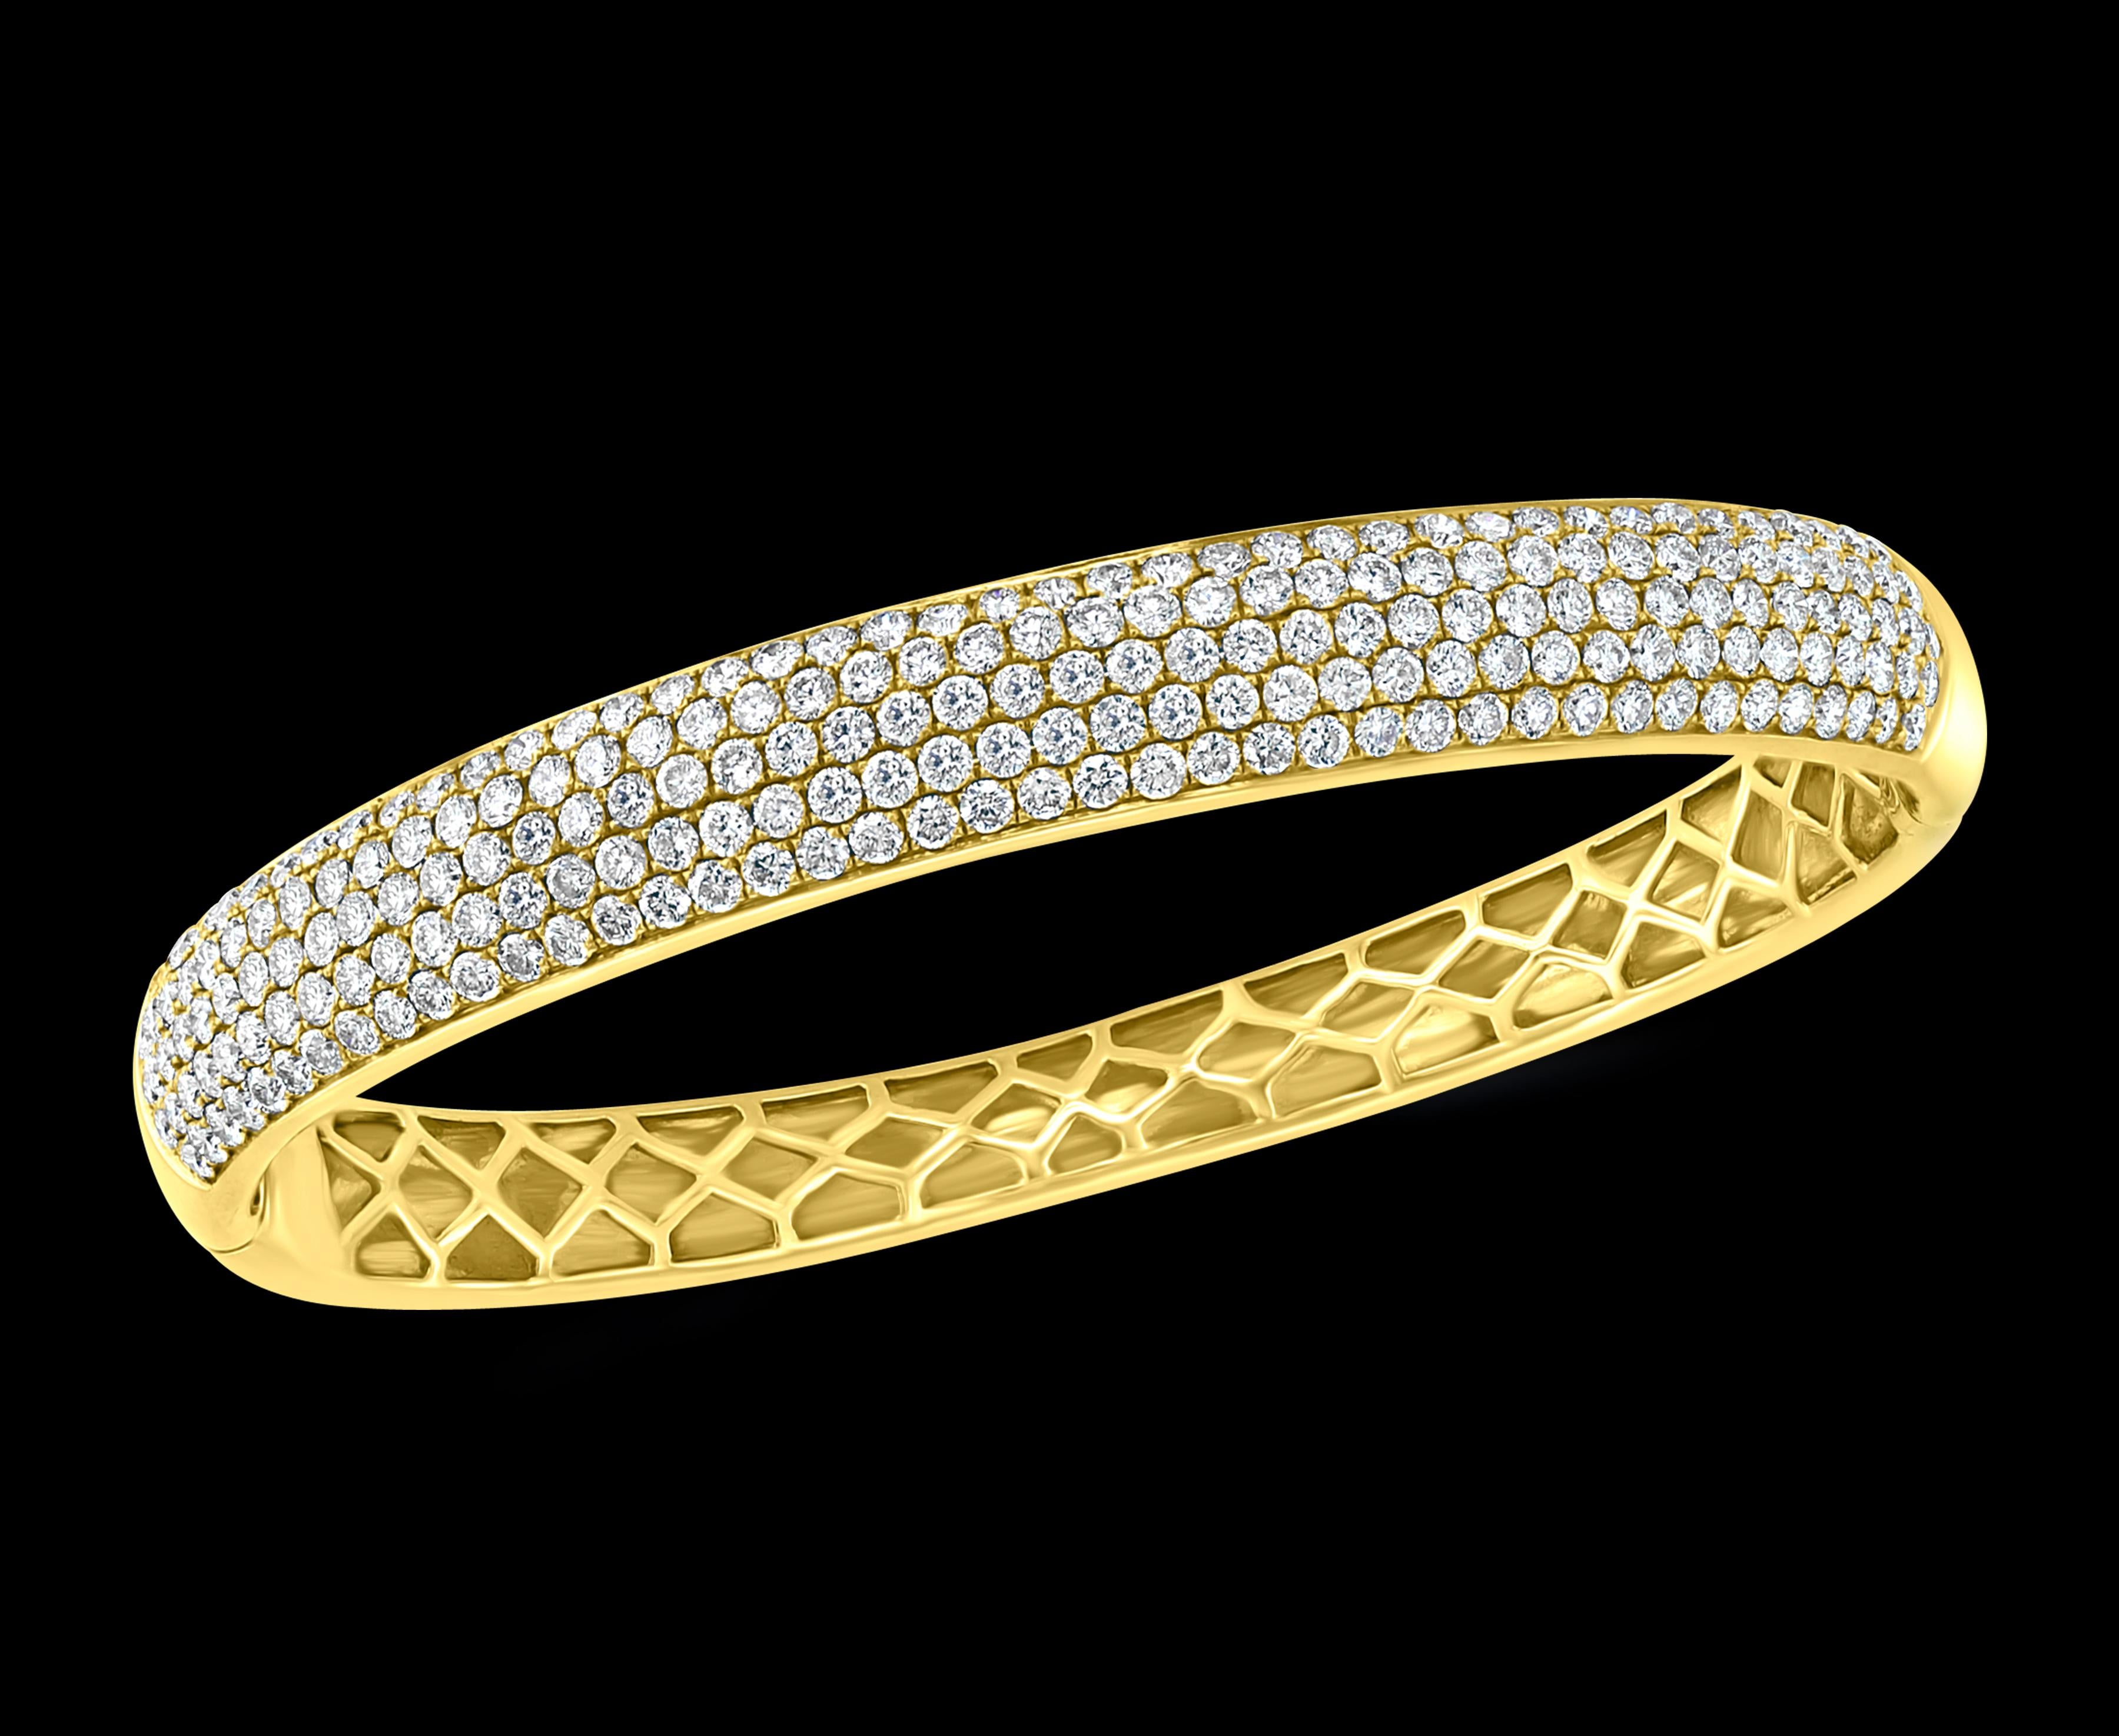 
5.5 Ct Diamond Metro Women 18 Kt Yellow Gold 5-Row Diamond Pave Bangle Bracelet
Streamlined and modern, this Metro collection twinkles like a nighttime city skyline. Rows of diamonds effortlessly enhance this striking bangle.
Exceptional elegance,